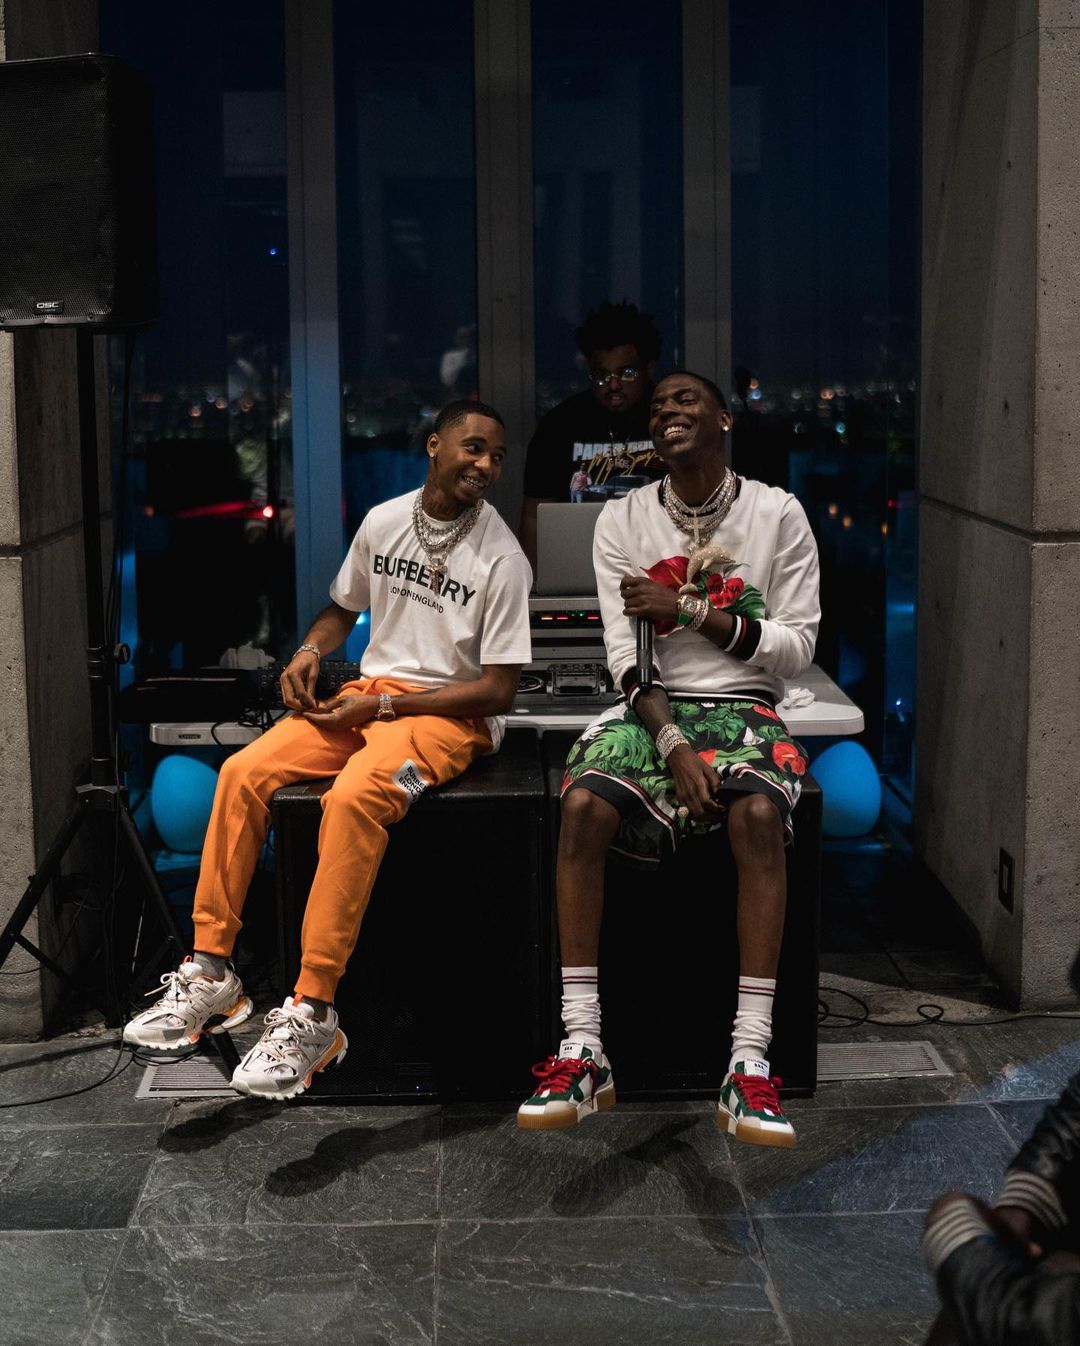 Key Glock Speaks On The Death Of His Cousin And Mentor, Young Dolph: ‘I’ll Never Be The Same’